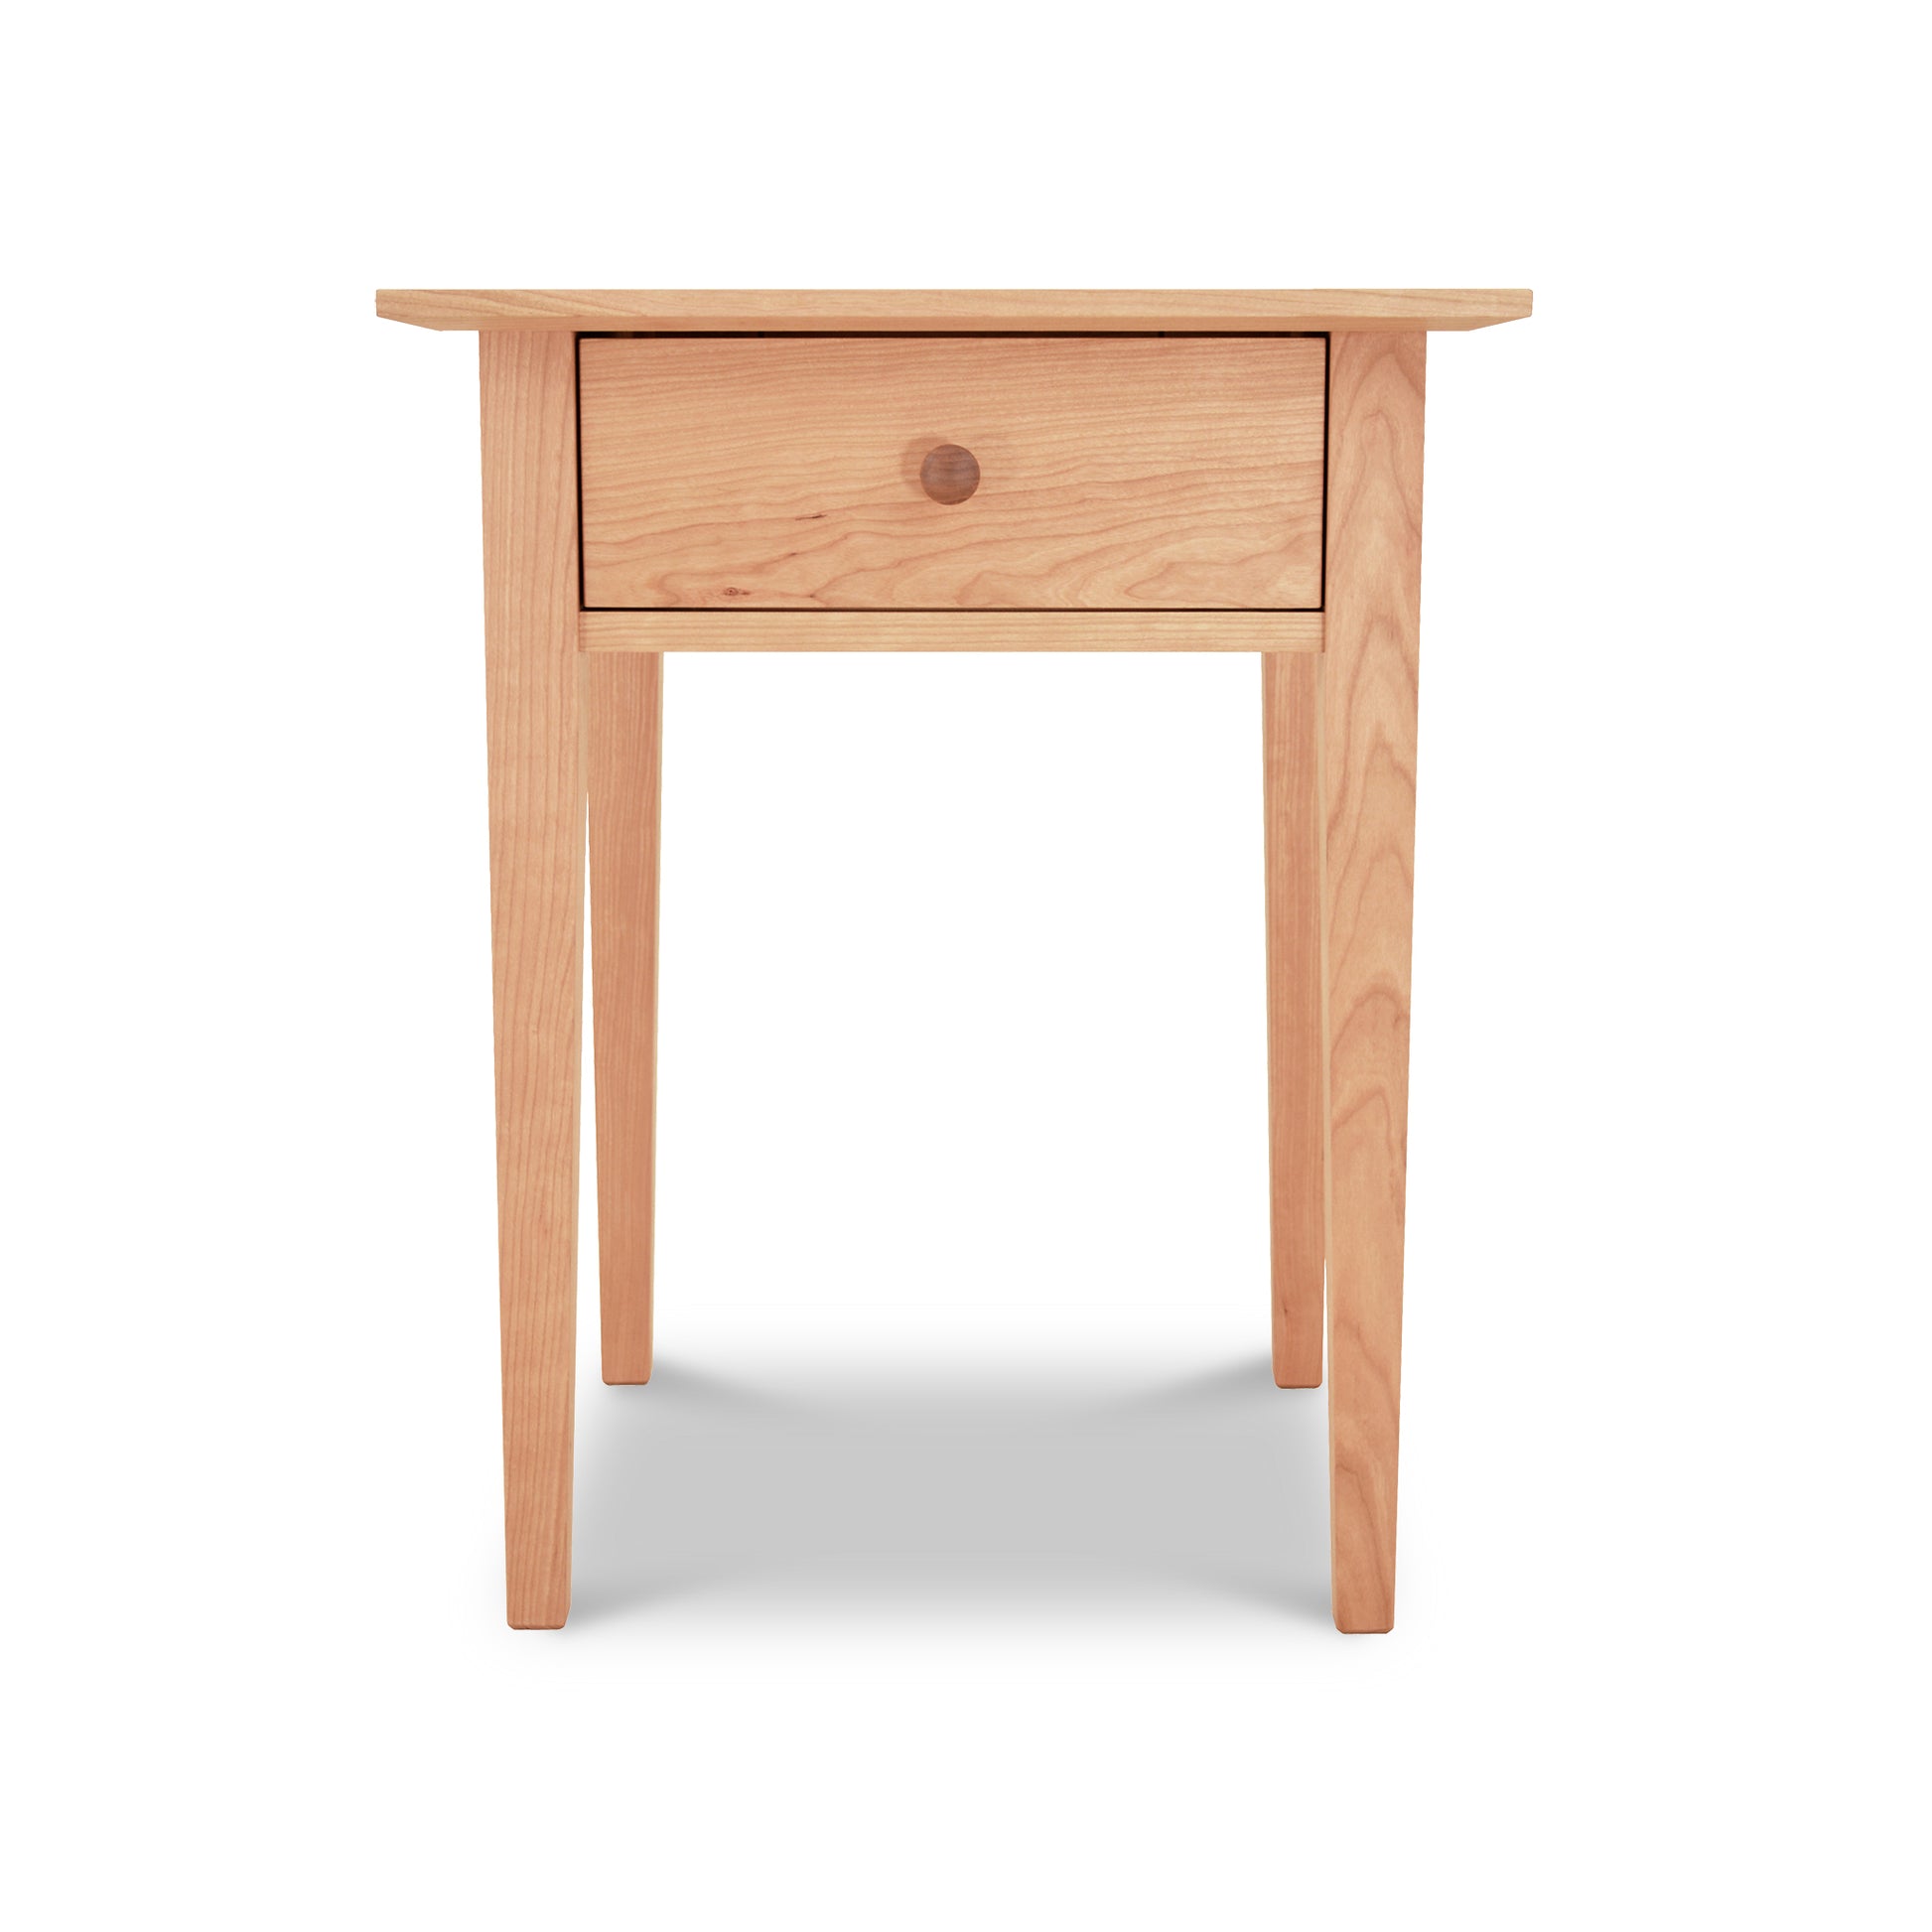 A simple American Shaker 1-Drawer Nightstand from Maple Corner Woodworks, featuring a round knob, handcrafted from solid hardwoods, standing against a plain white background.